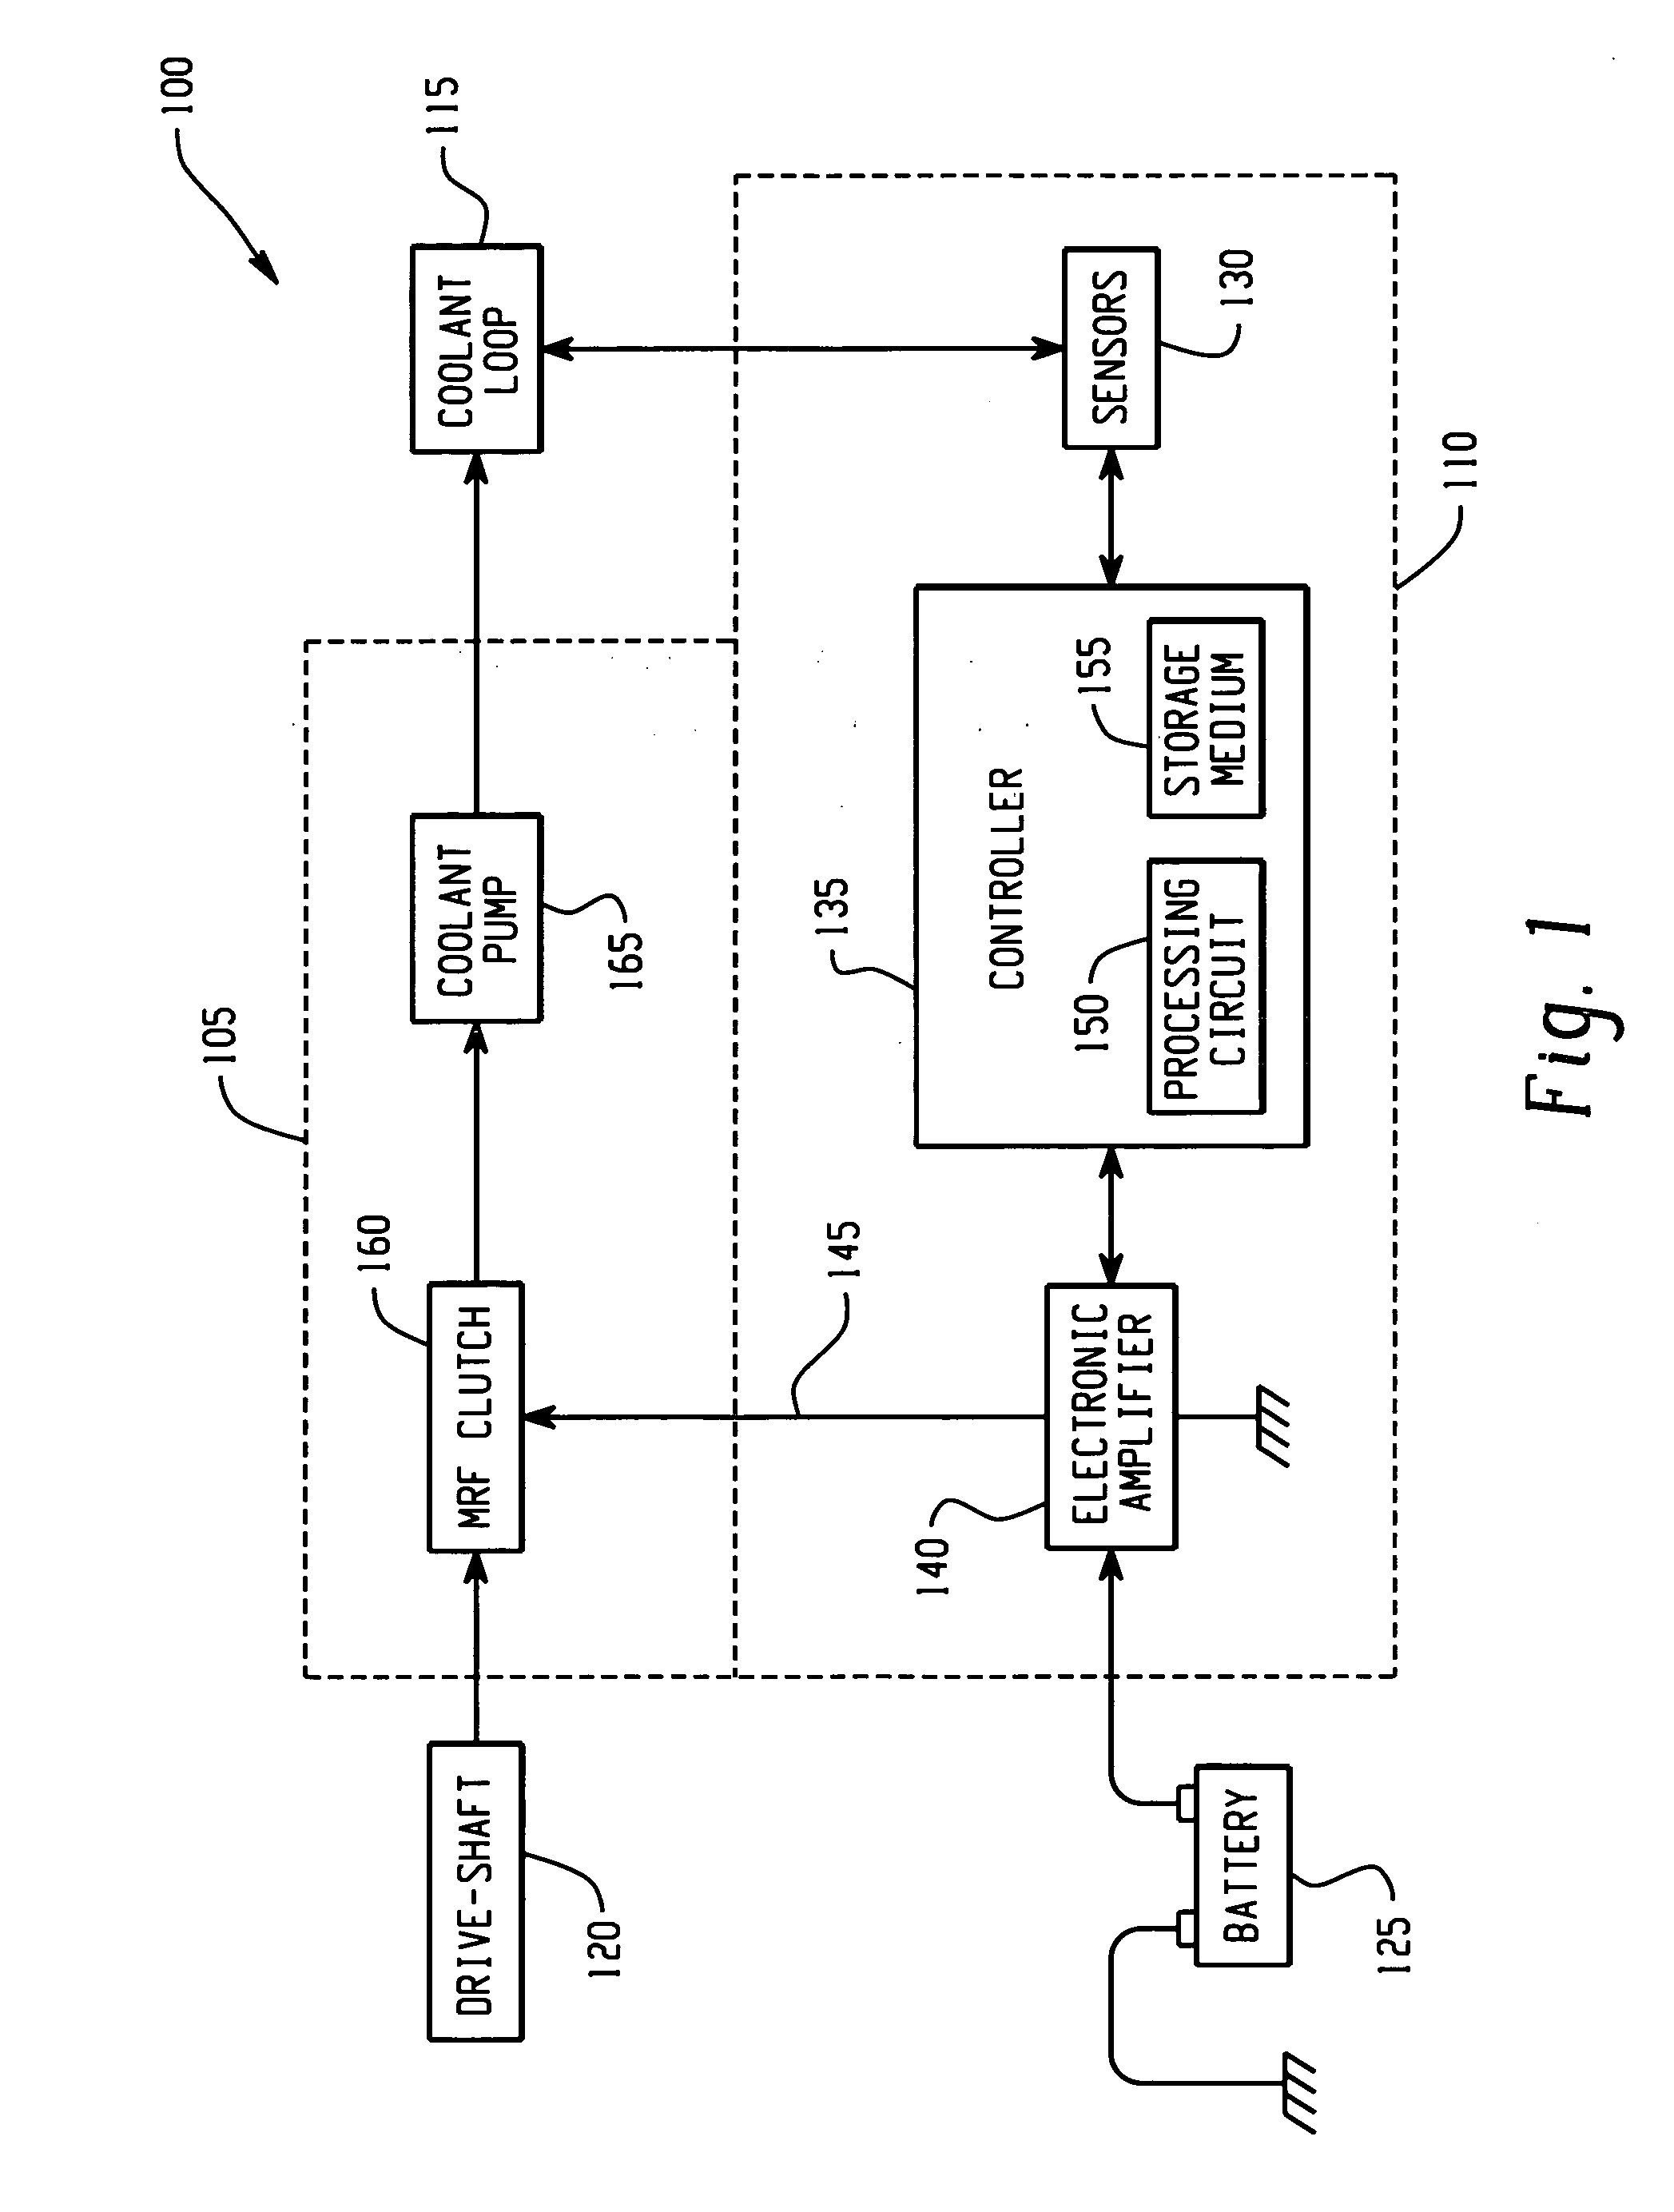 Engine coolant pump drive system and apparatus for a vehicle